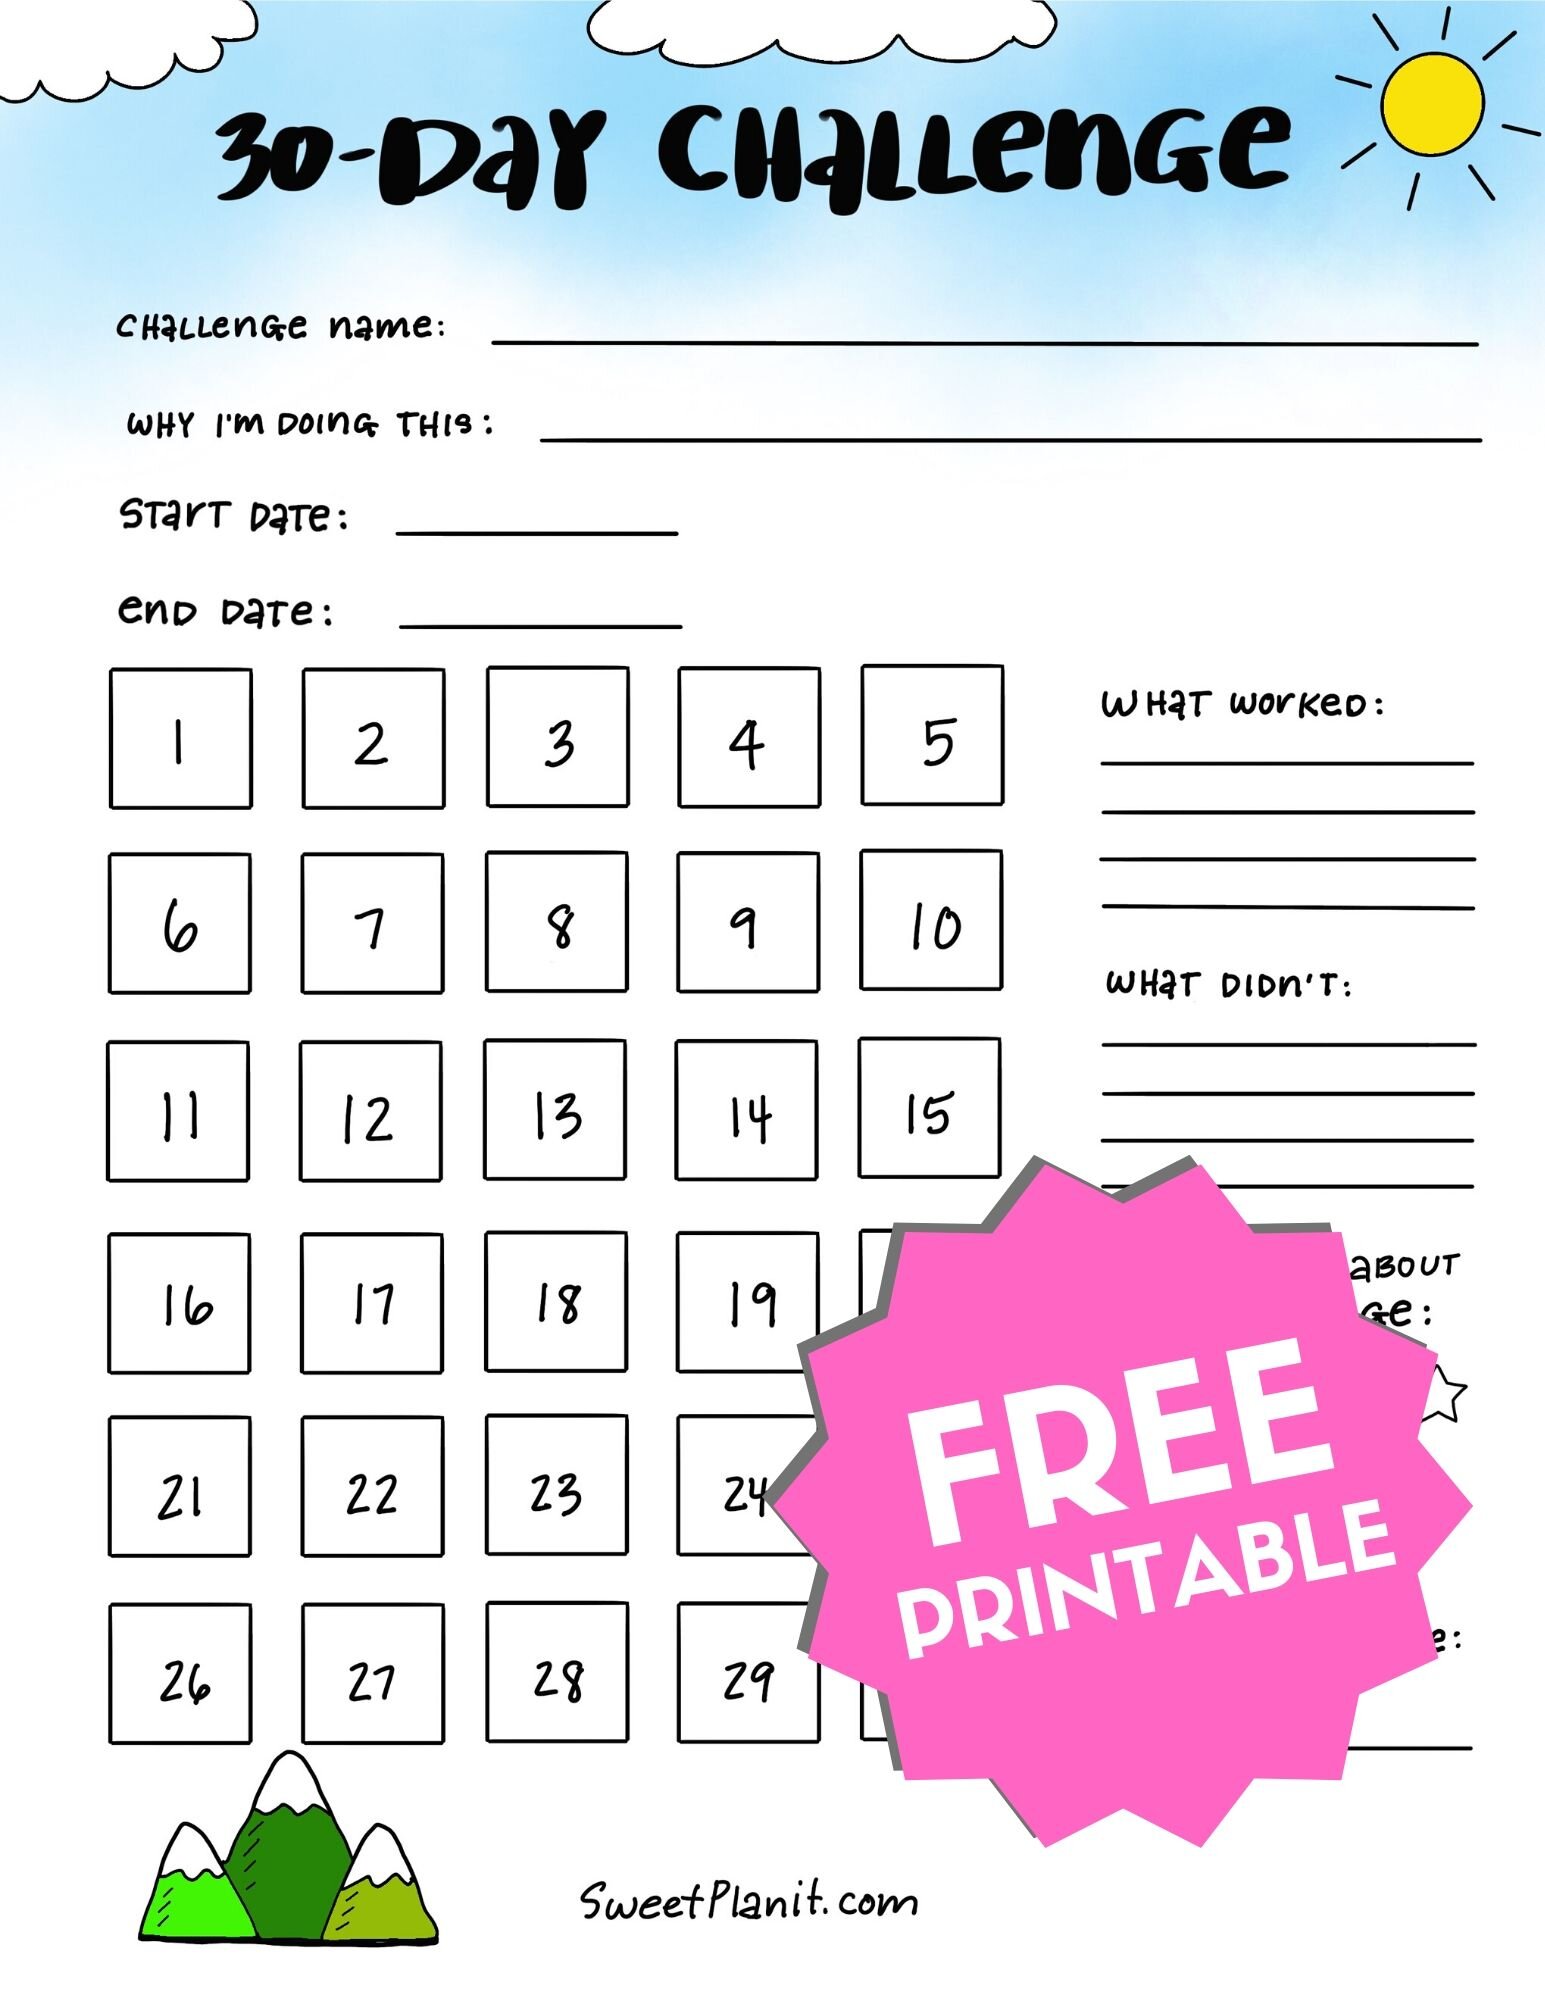 30-day-monthly-challenge-free-printable-sweet-planit